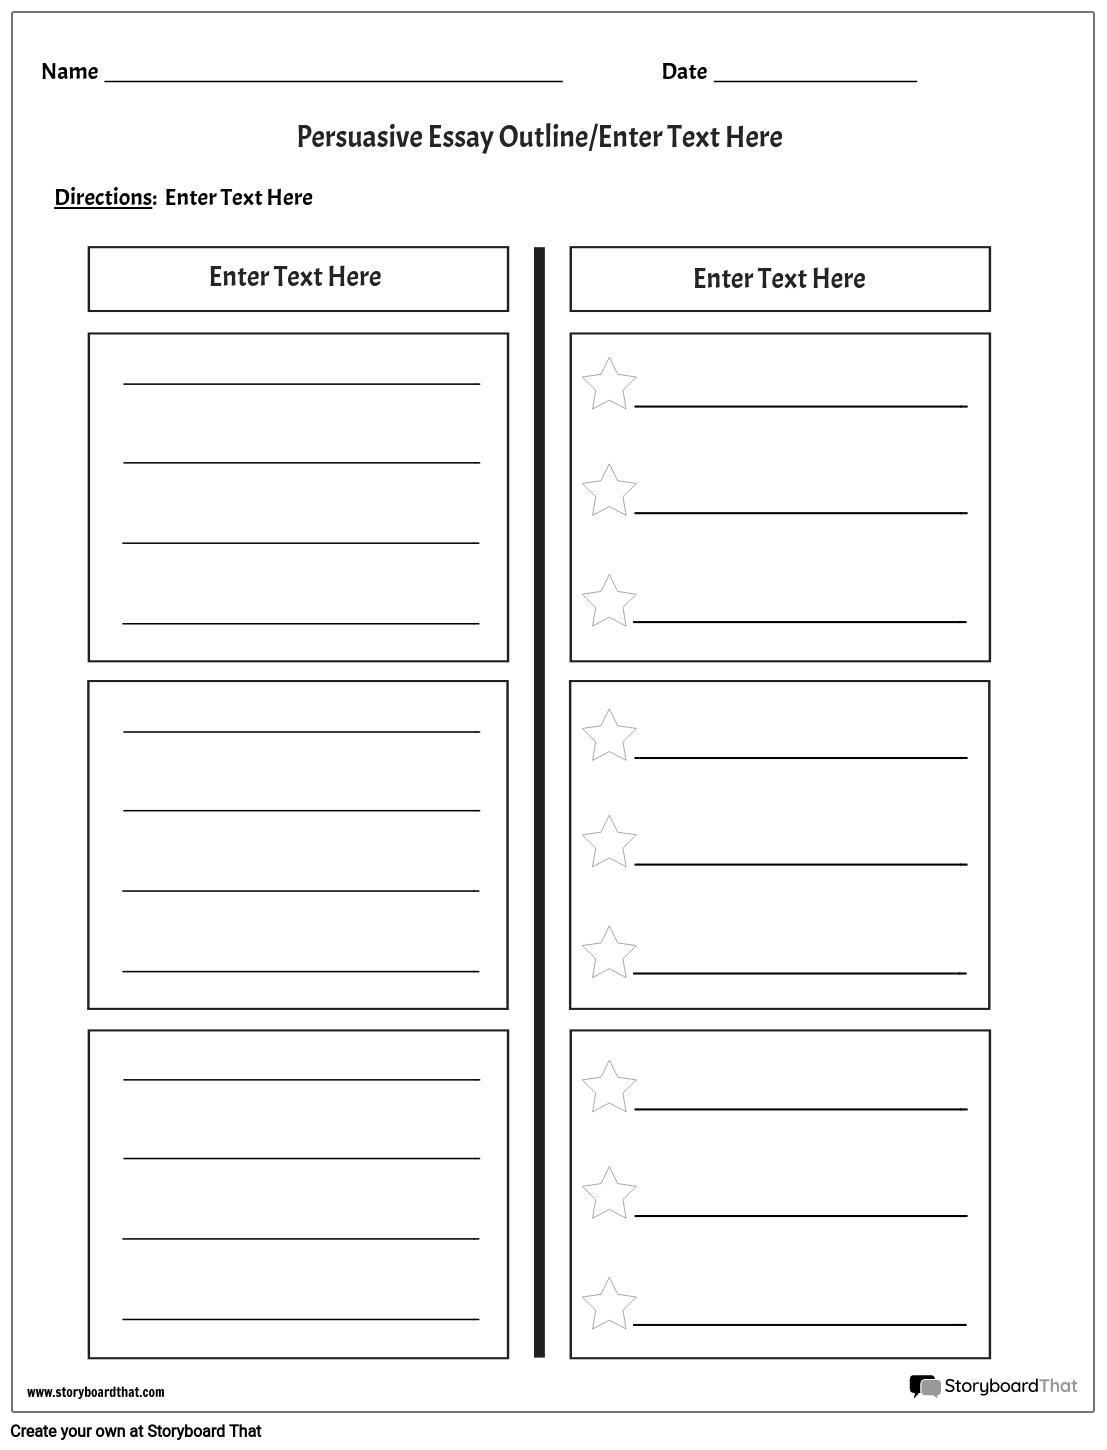 study outline template